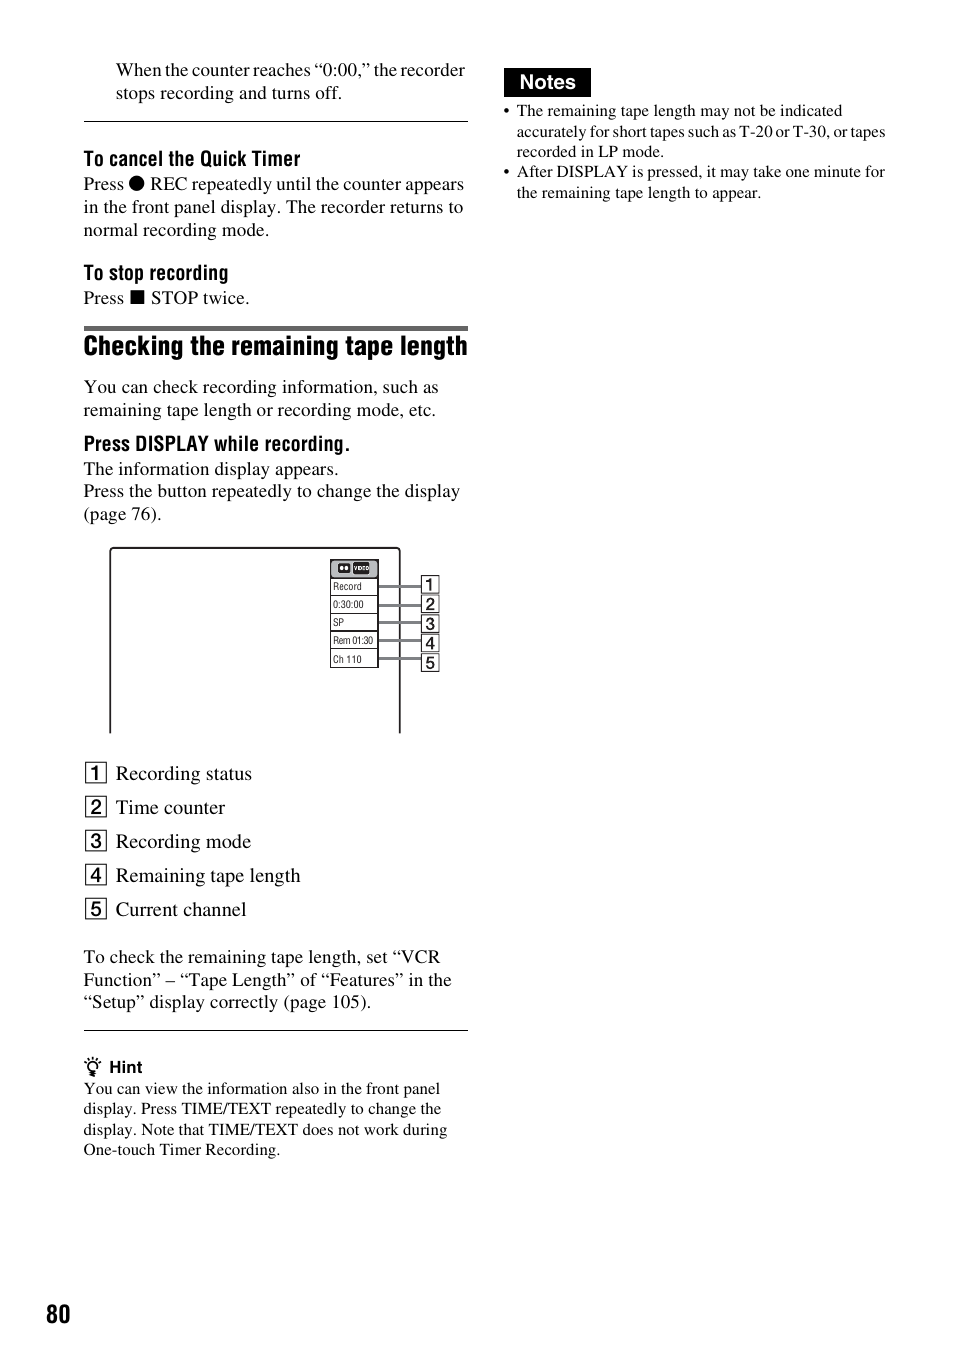 Checking the remaining tape length | Sony RDR-VX521 User Manual | Page 80 / 132